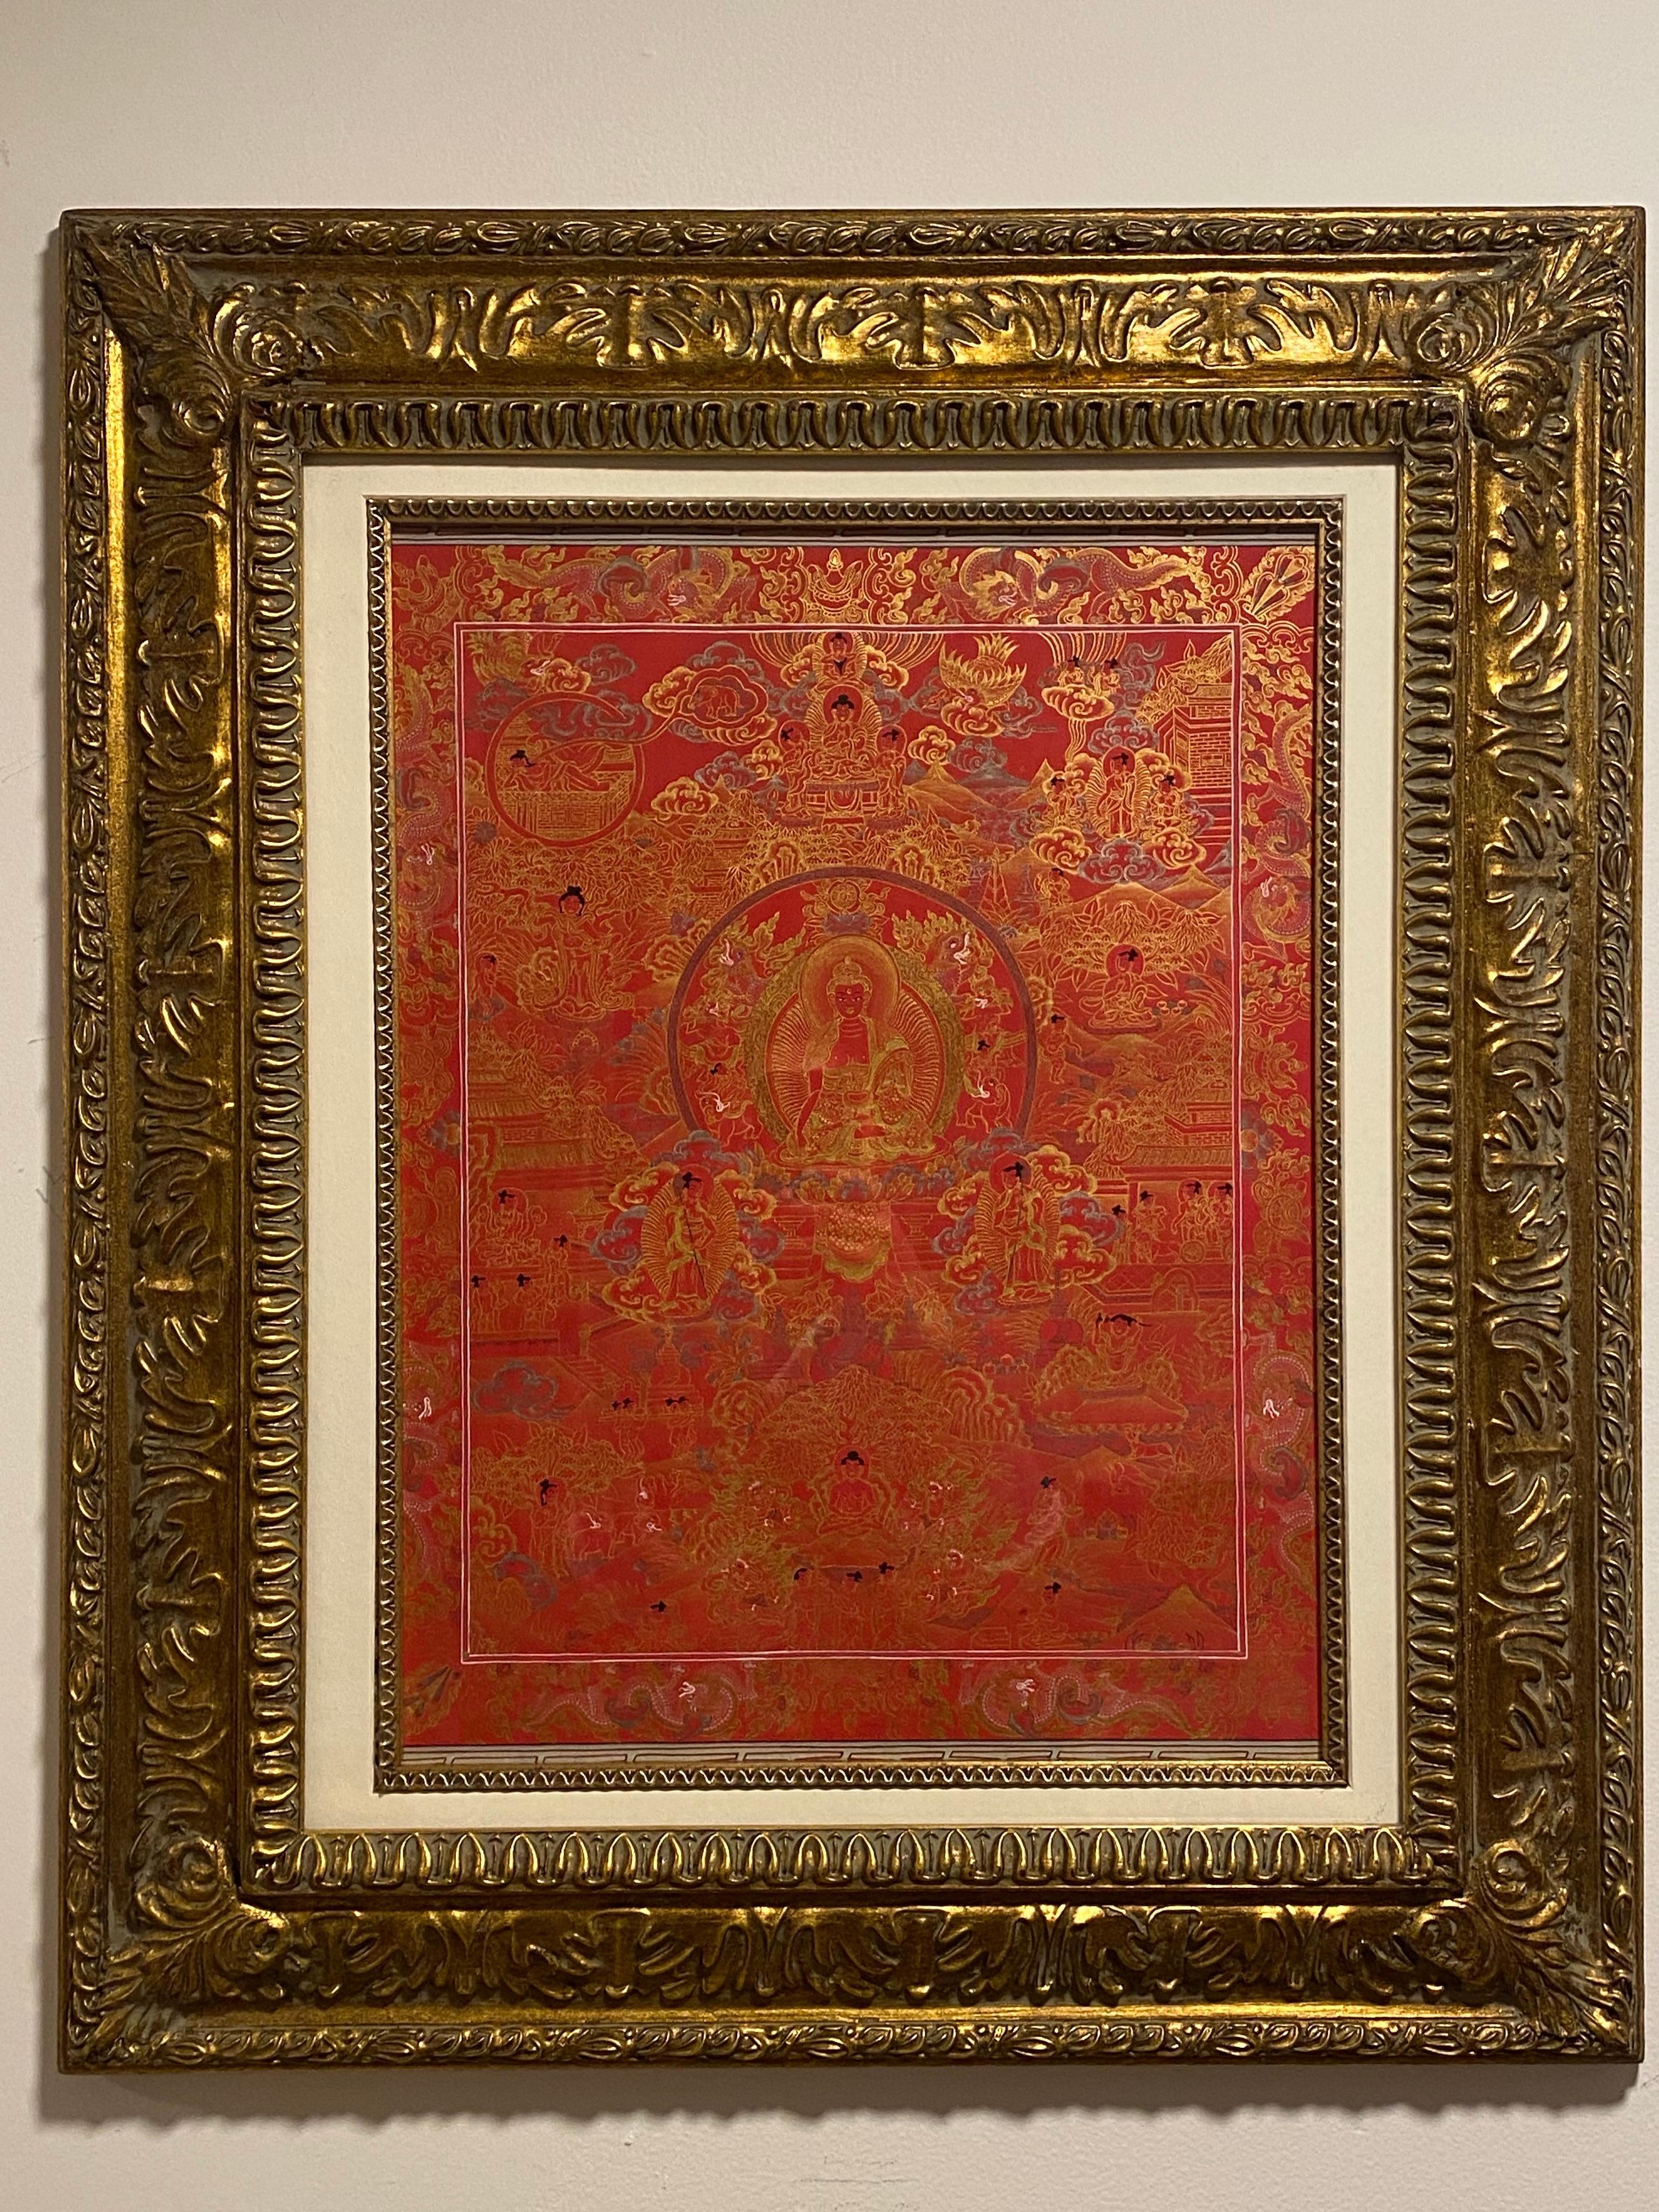 Framed Hand Painted on Canvas Life History of Buddha Thangka 24K Gold - Painting by Unknown